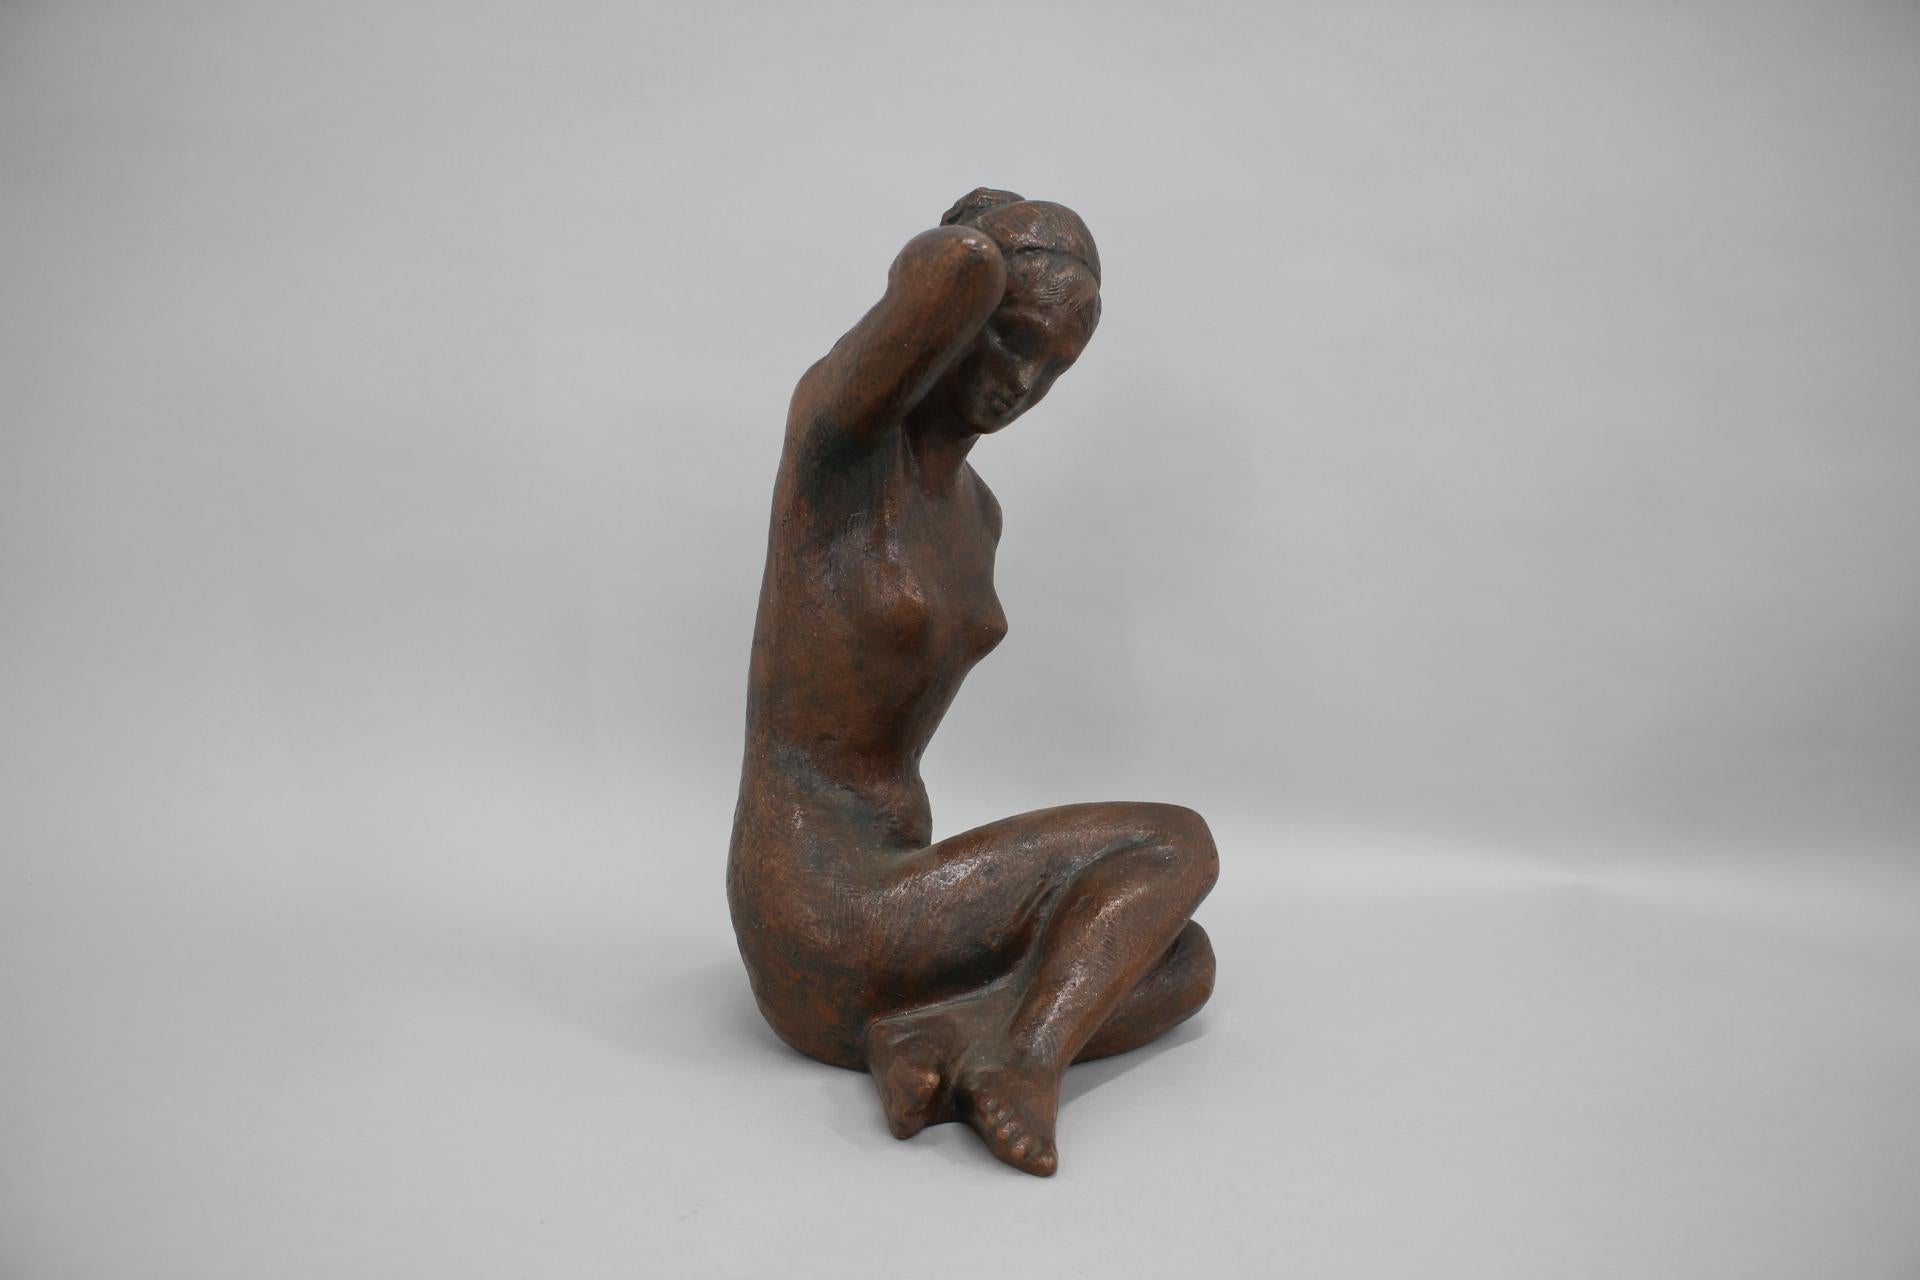 Mid-Century Modern Mid-Century Sculpture of Nude Sitting Women Designed by Jitka Forejtová, 1960s